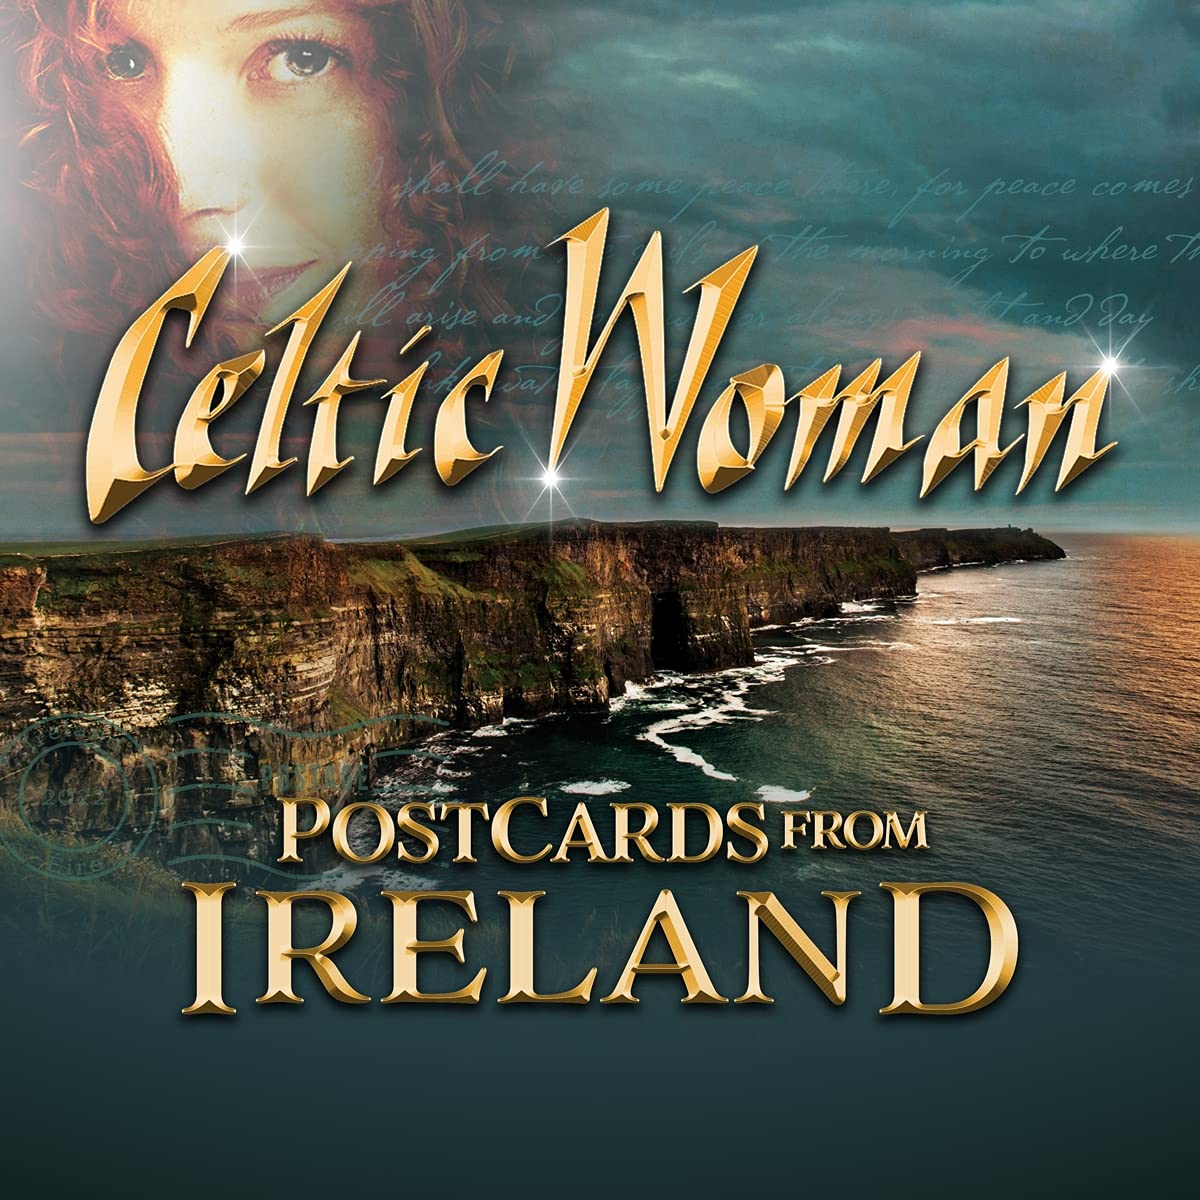 CD Shop - CELTIC WOMAN POSTCARDS FROM IRELAND